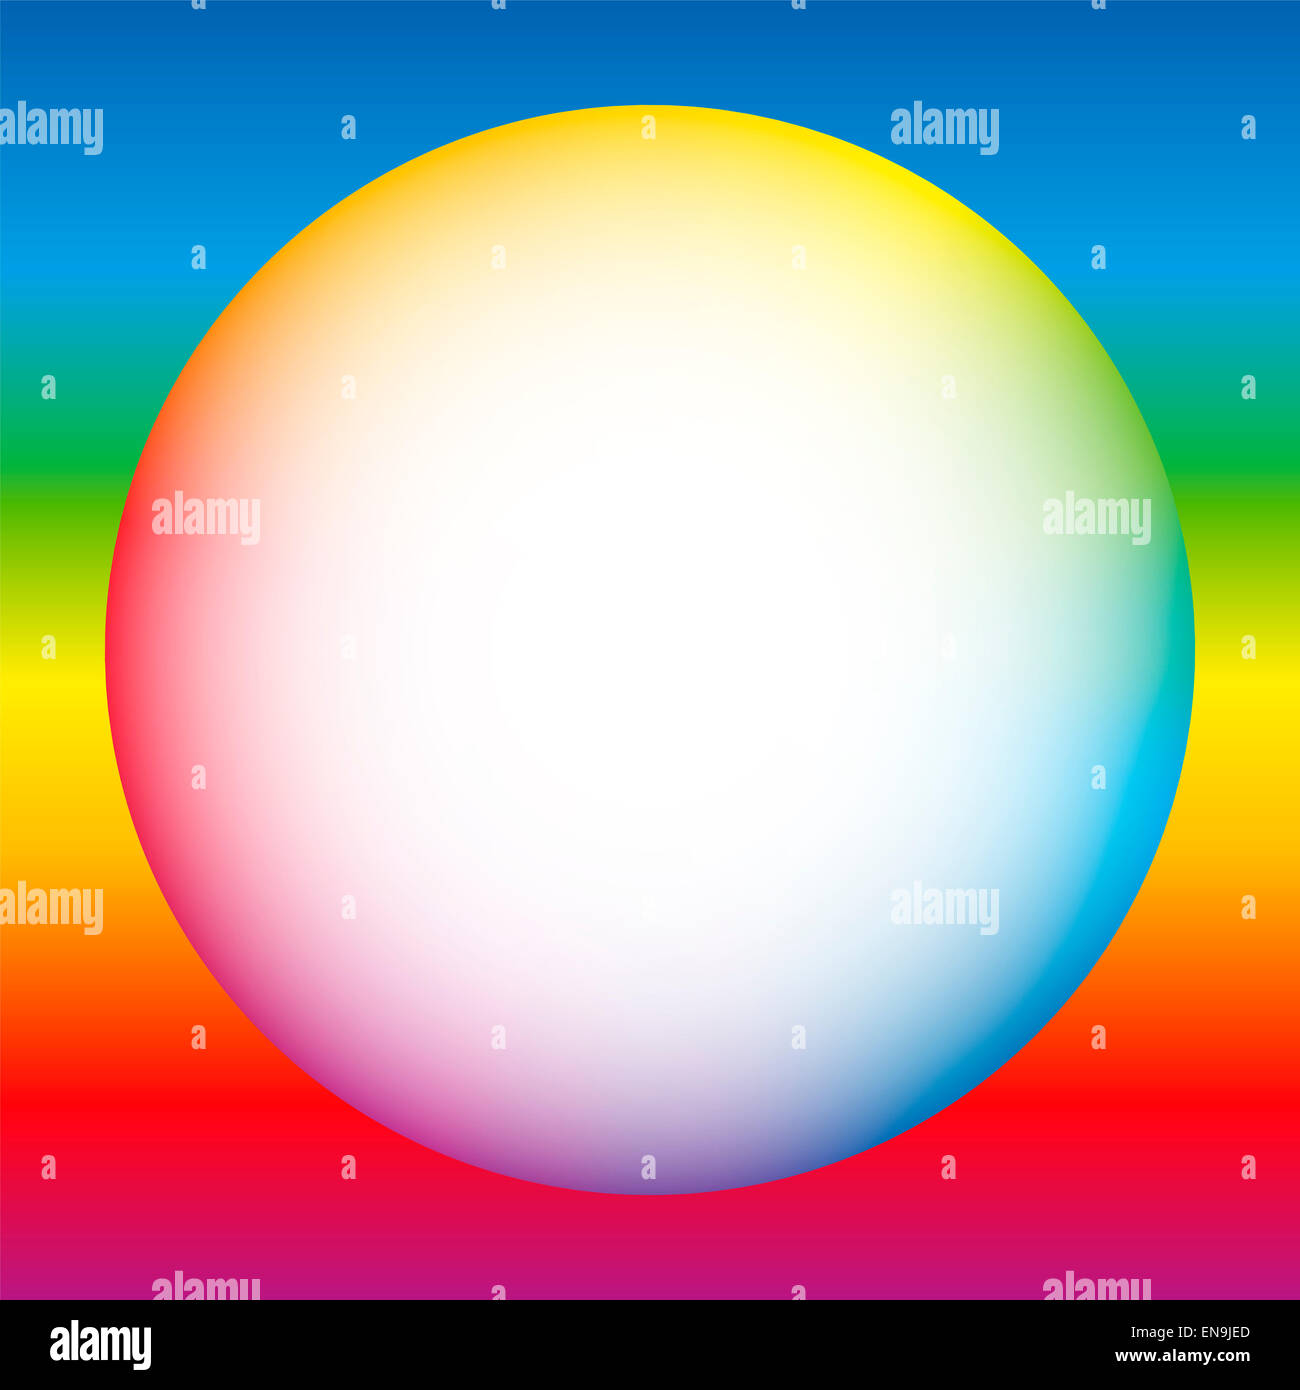 Rainbow colored bubble with white center. Stock Photo